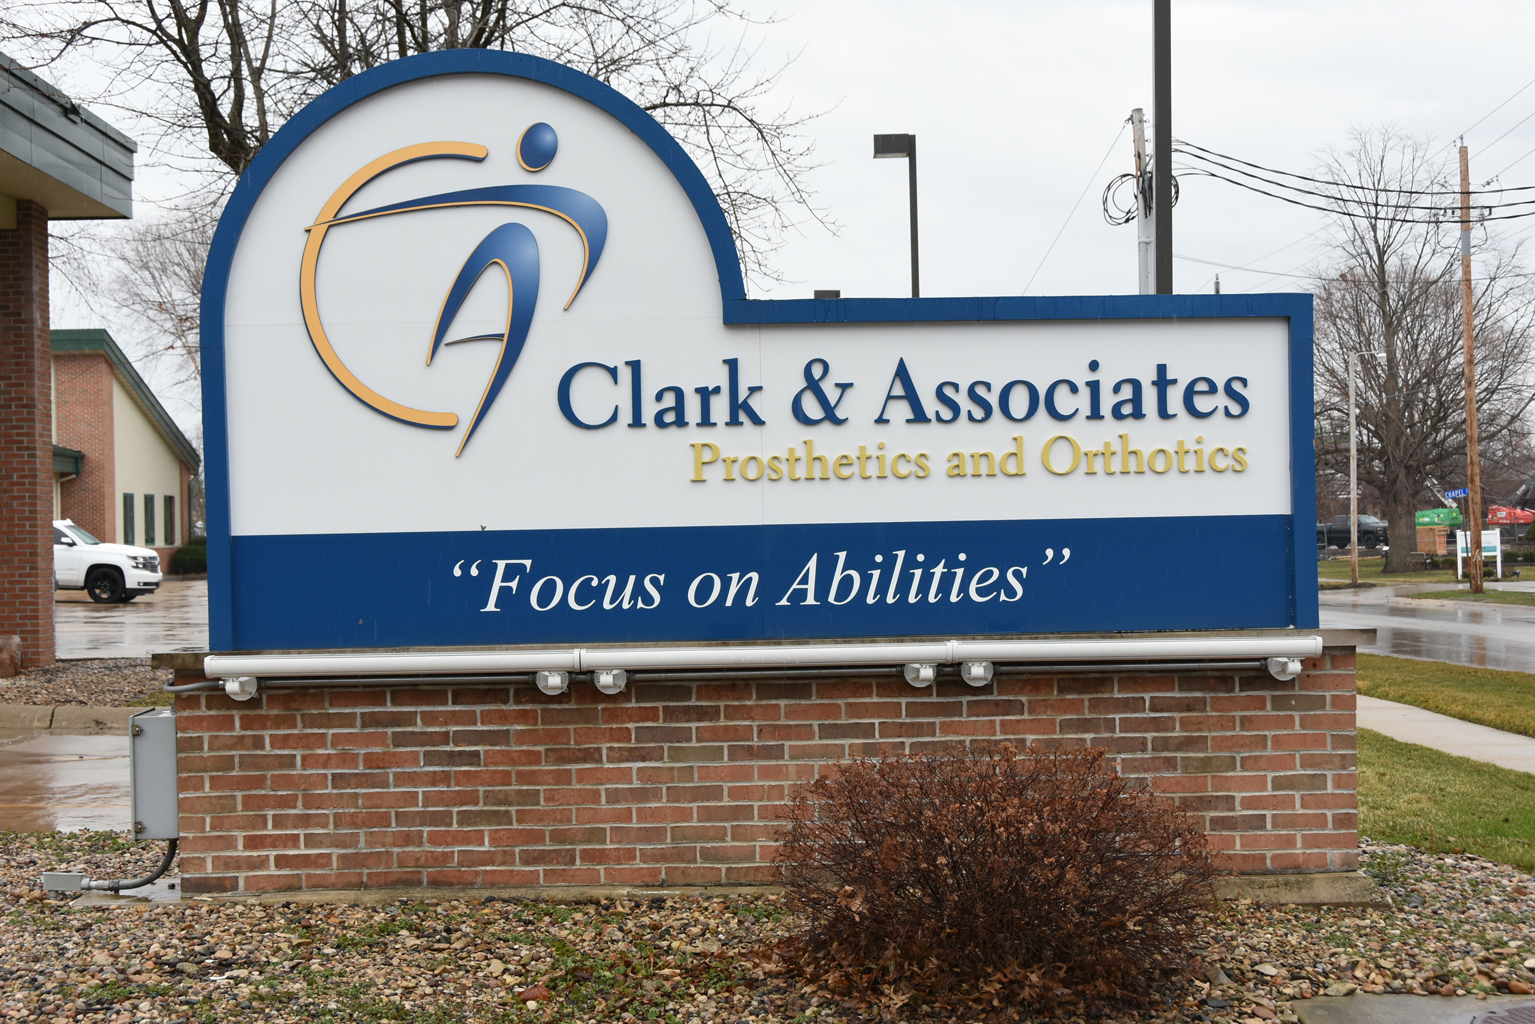 Clark & Associates, American Prosthetics for Veterans, Only Iowa Owned O&P Company